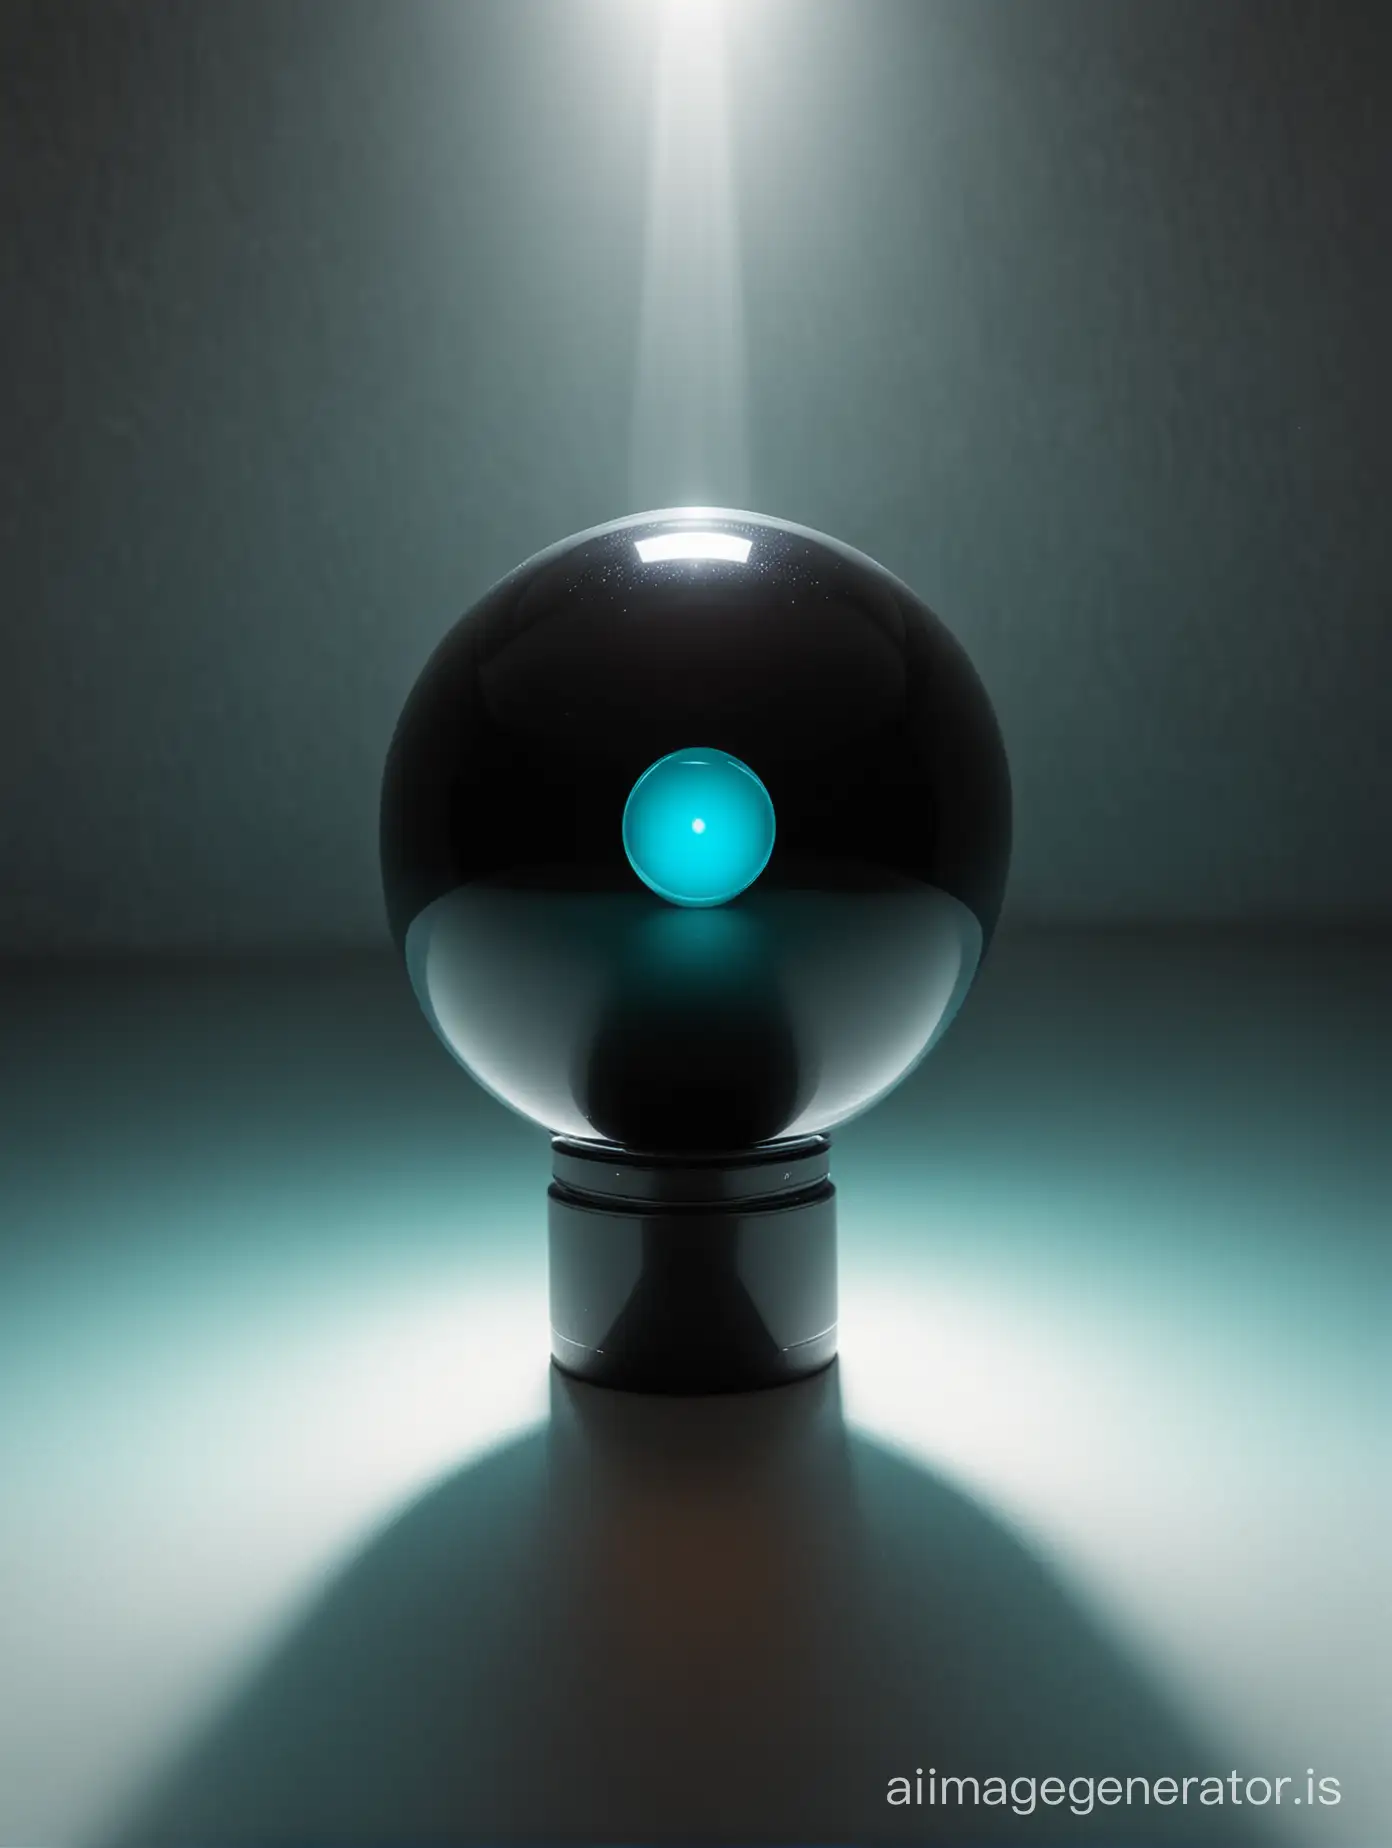 Abstract-Composition-Black-Ball-with-Turquoise-Spot-and-Radiant-Light